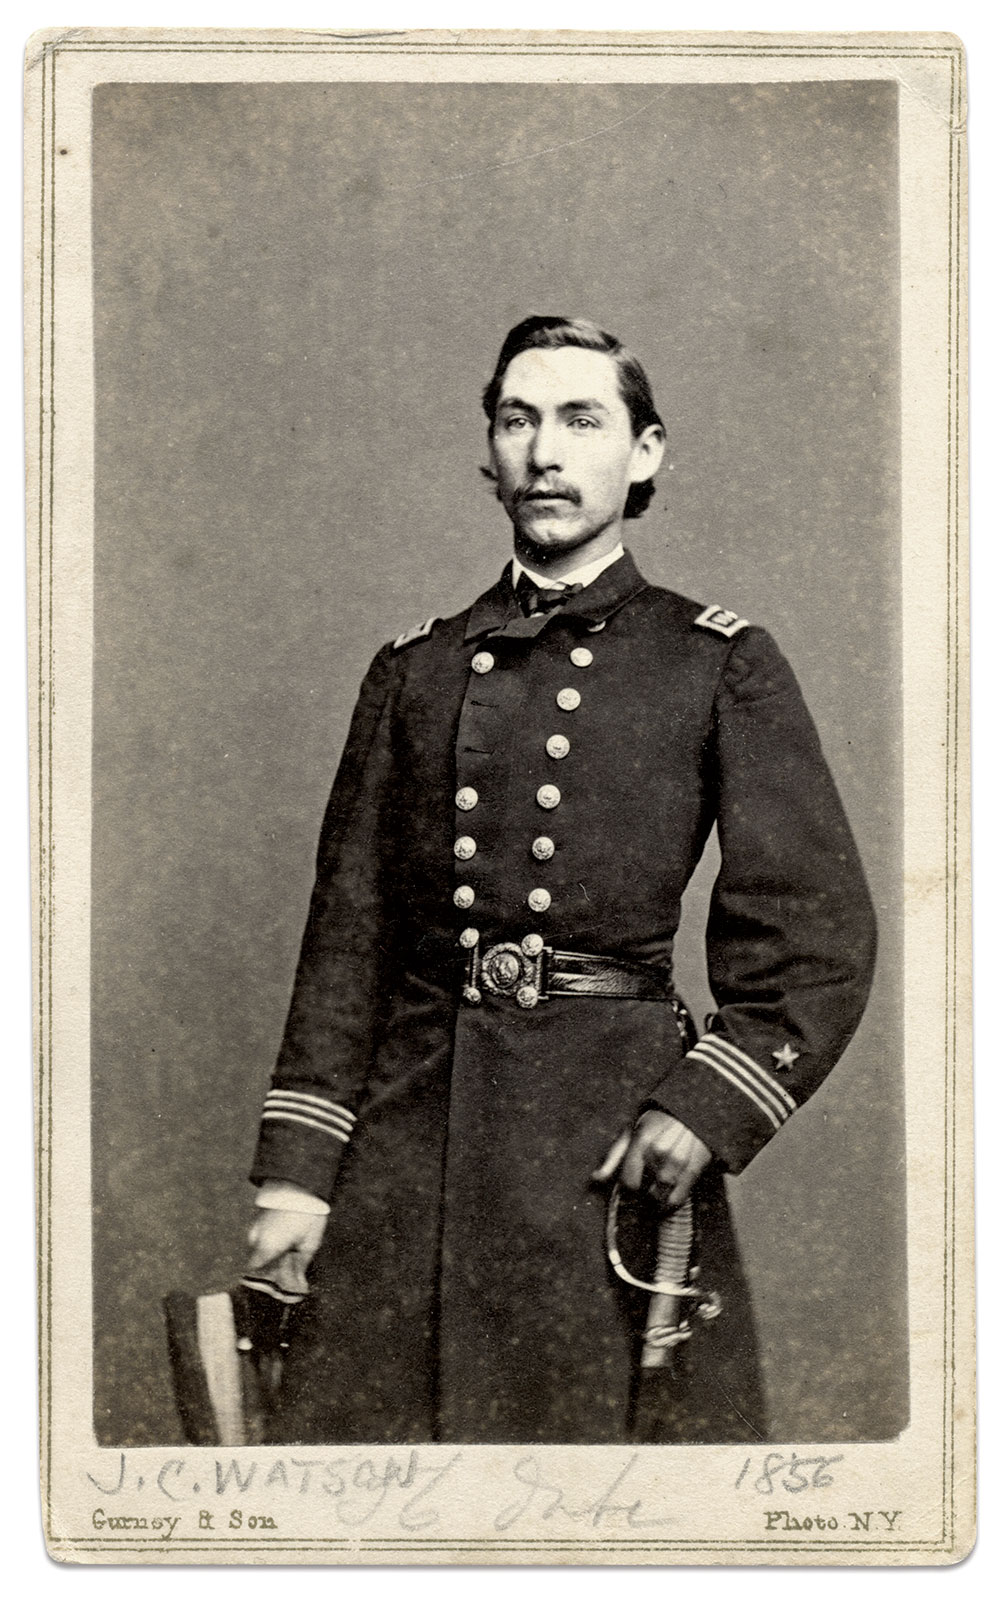 Lt. Watson during the Civil War. Carte de visite by Jeremiah Gurney and Son of New York City. Ronald S. Coddington Collection.